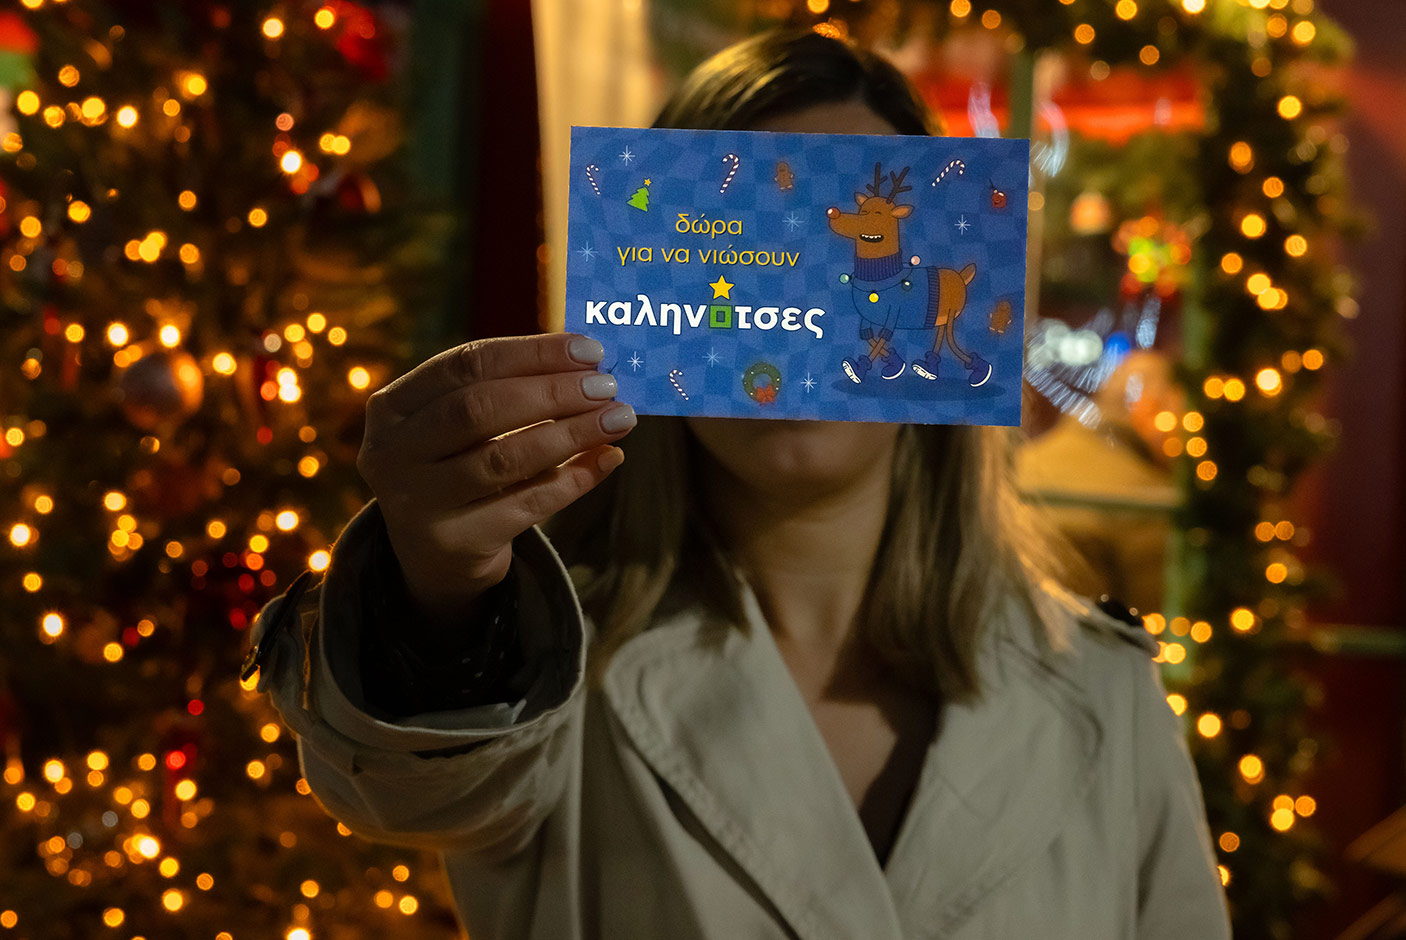 Girl holding a card that reads "Gifts to feel kalinotses" 